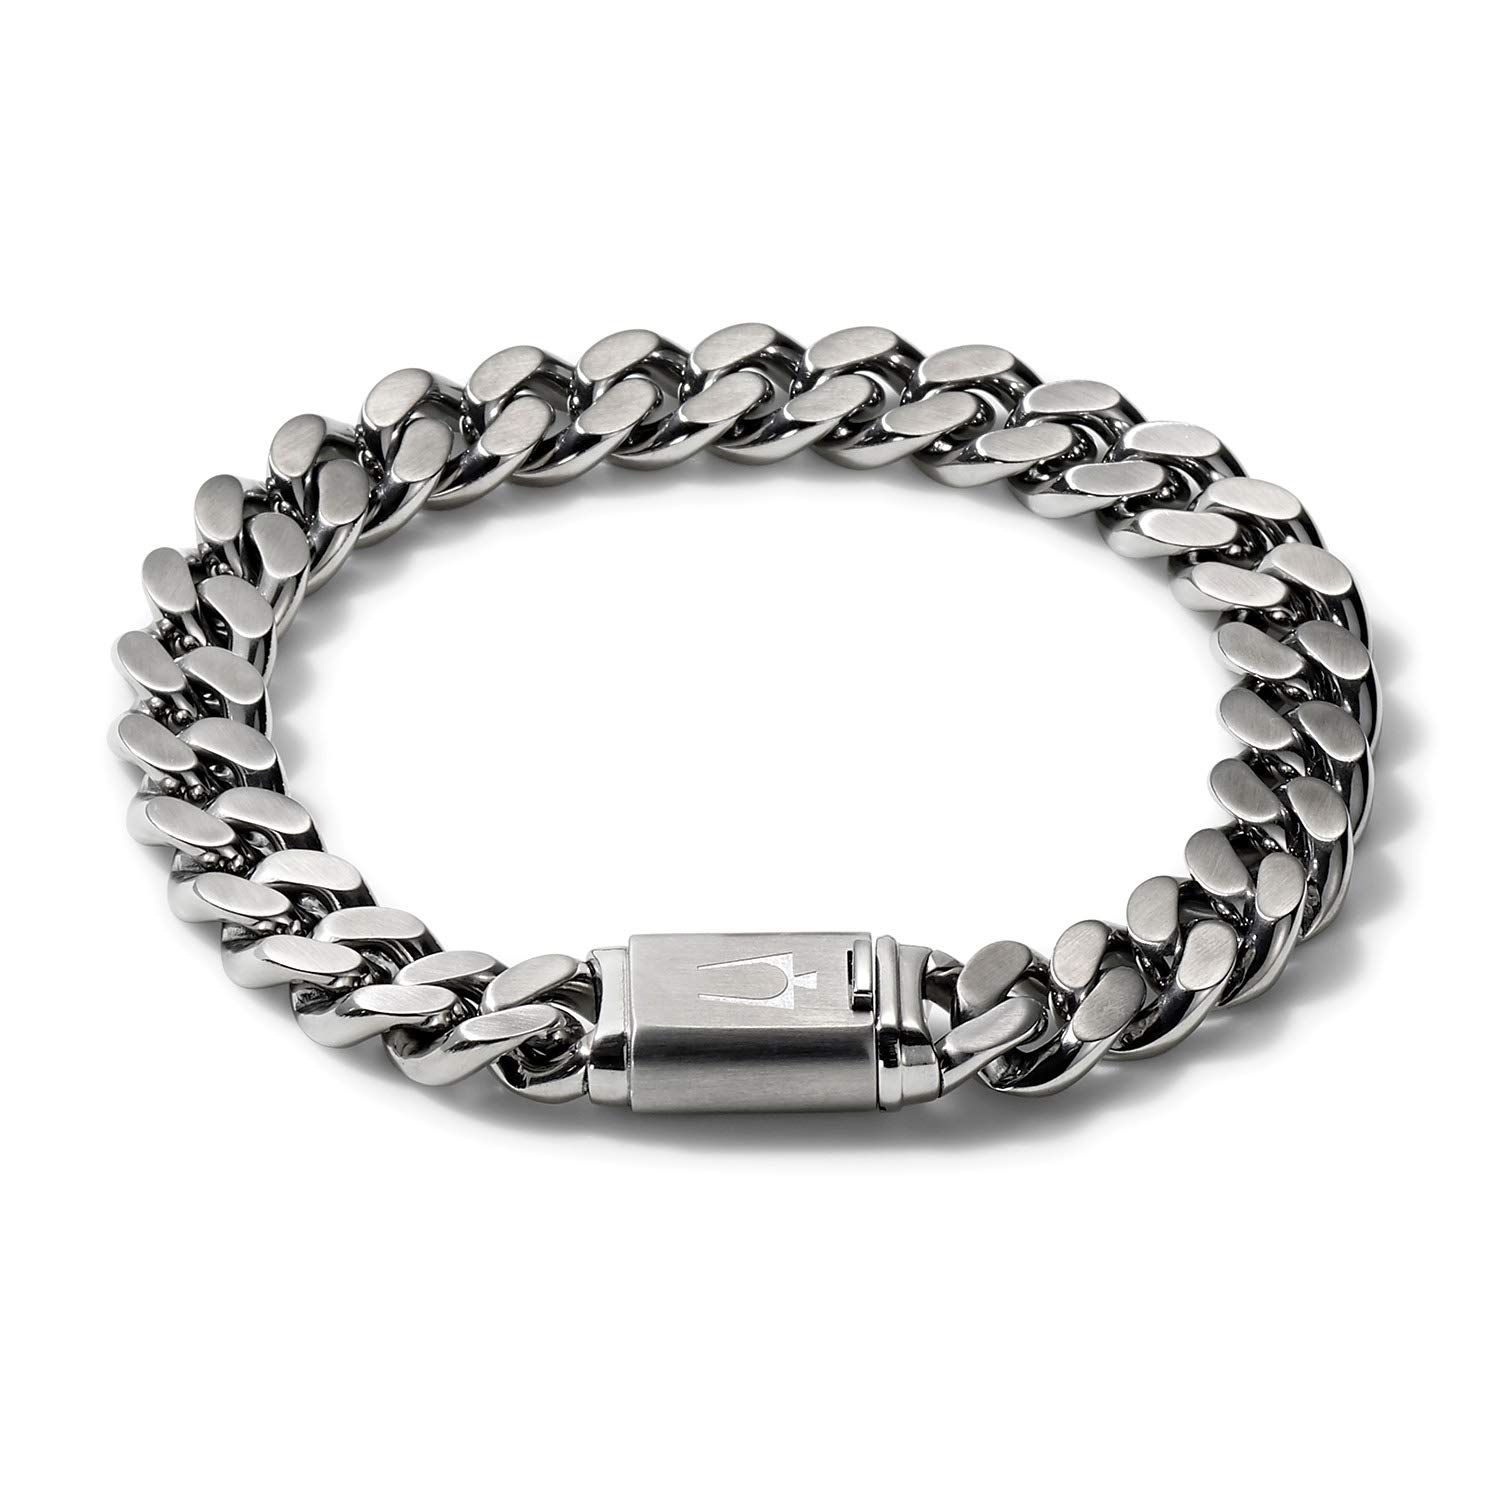 Bulova Jewelry Men's Classic Stainless Steel Chain Link Bracelet with Clasp Closure